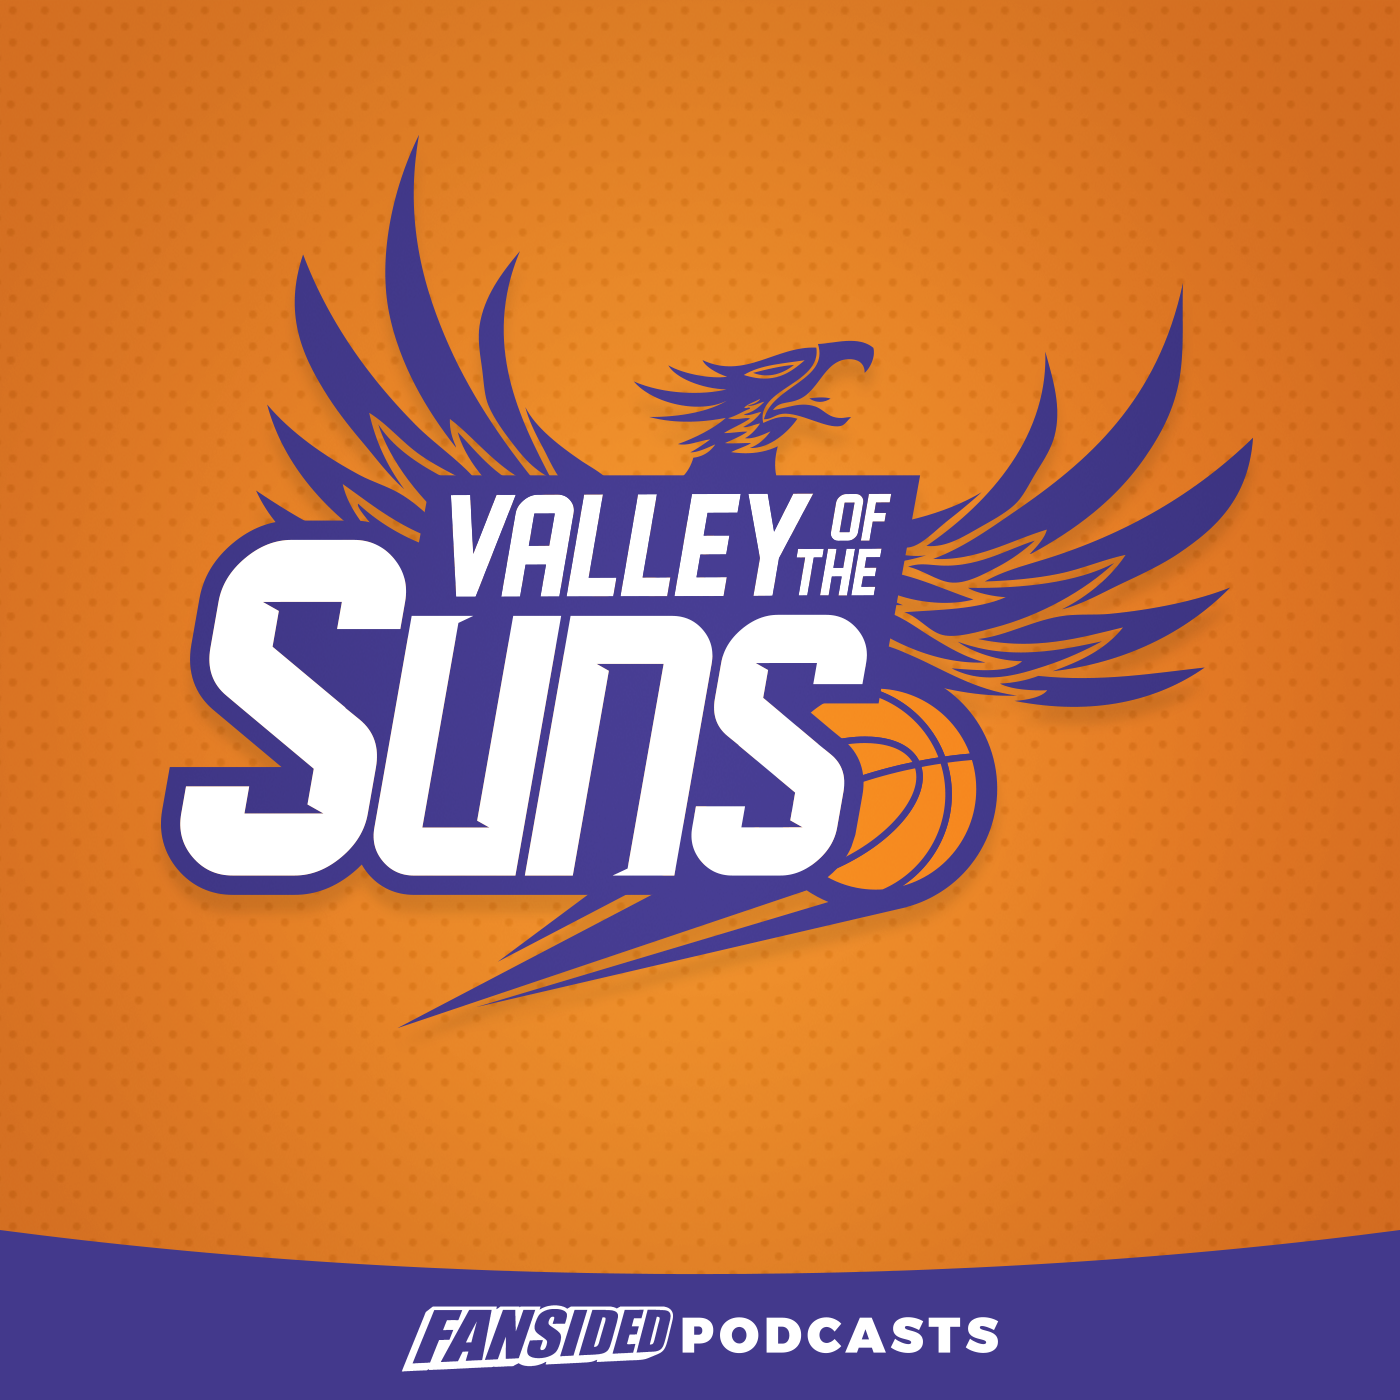 Valley of the Suns Podcast: Reasons not to panic, Booker vs. Beverley & 'The Handmaid's Tale'